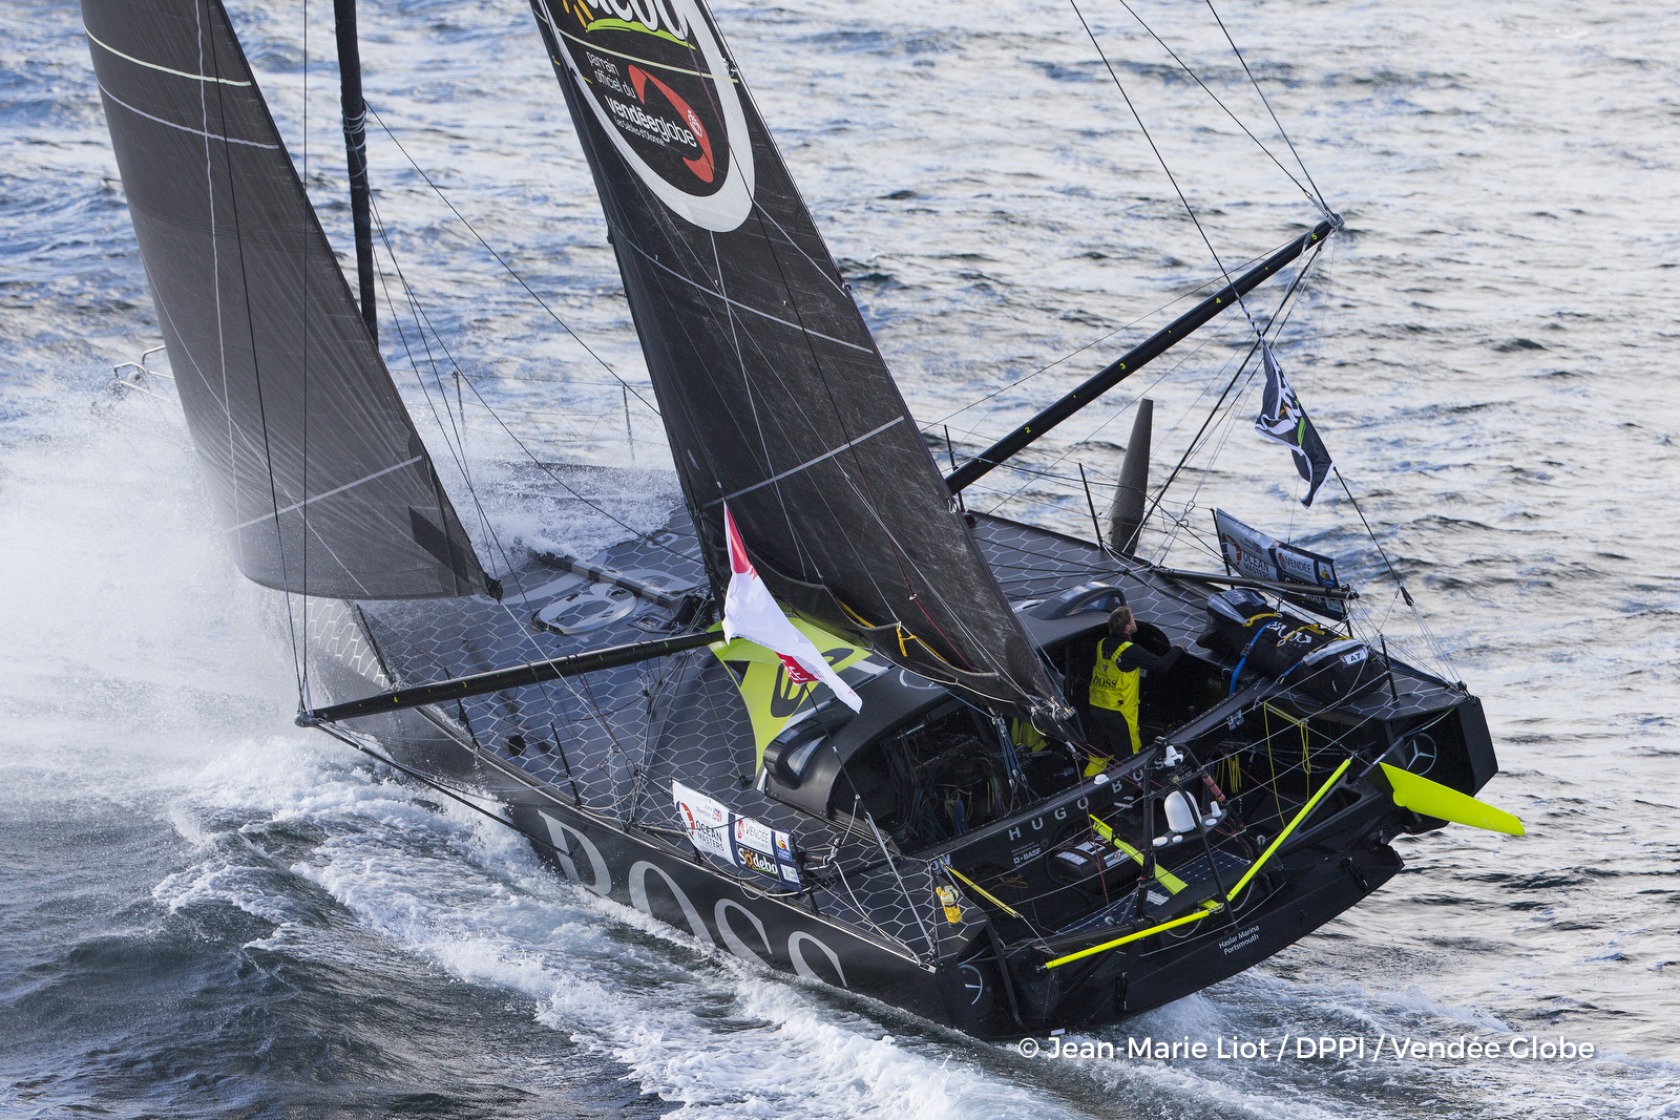  IMOCA Open 60  Vendee Globe 2016/17  Day 73  Letzter Tag fuer Le Cleac'h FRA und Thomson GBR